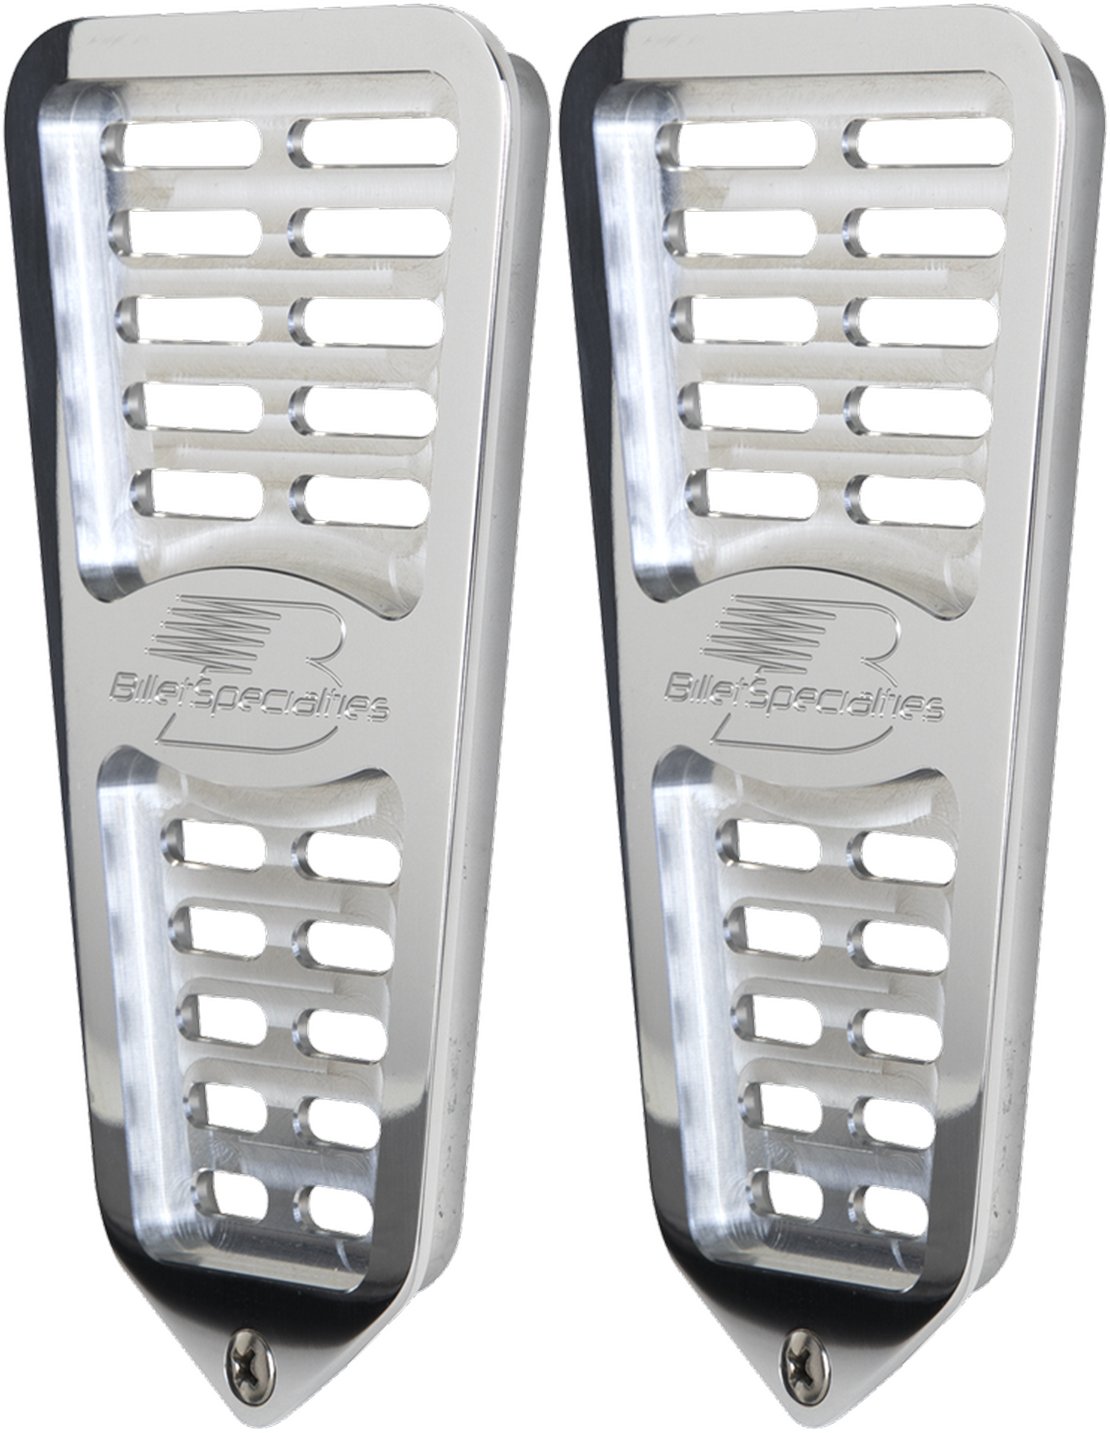 Door Jamb Vents for 1977-1990 Chevrolet Impala, Caprice [Polished]